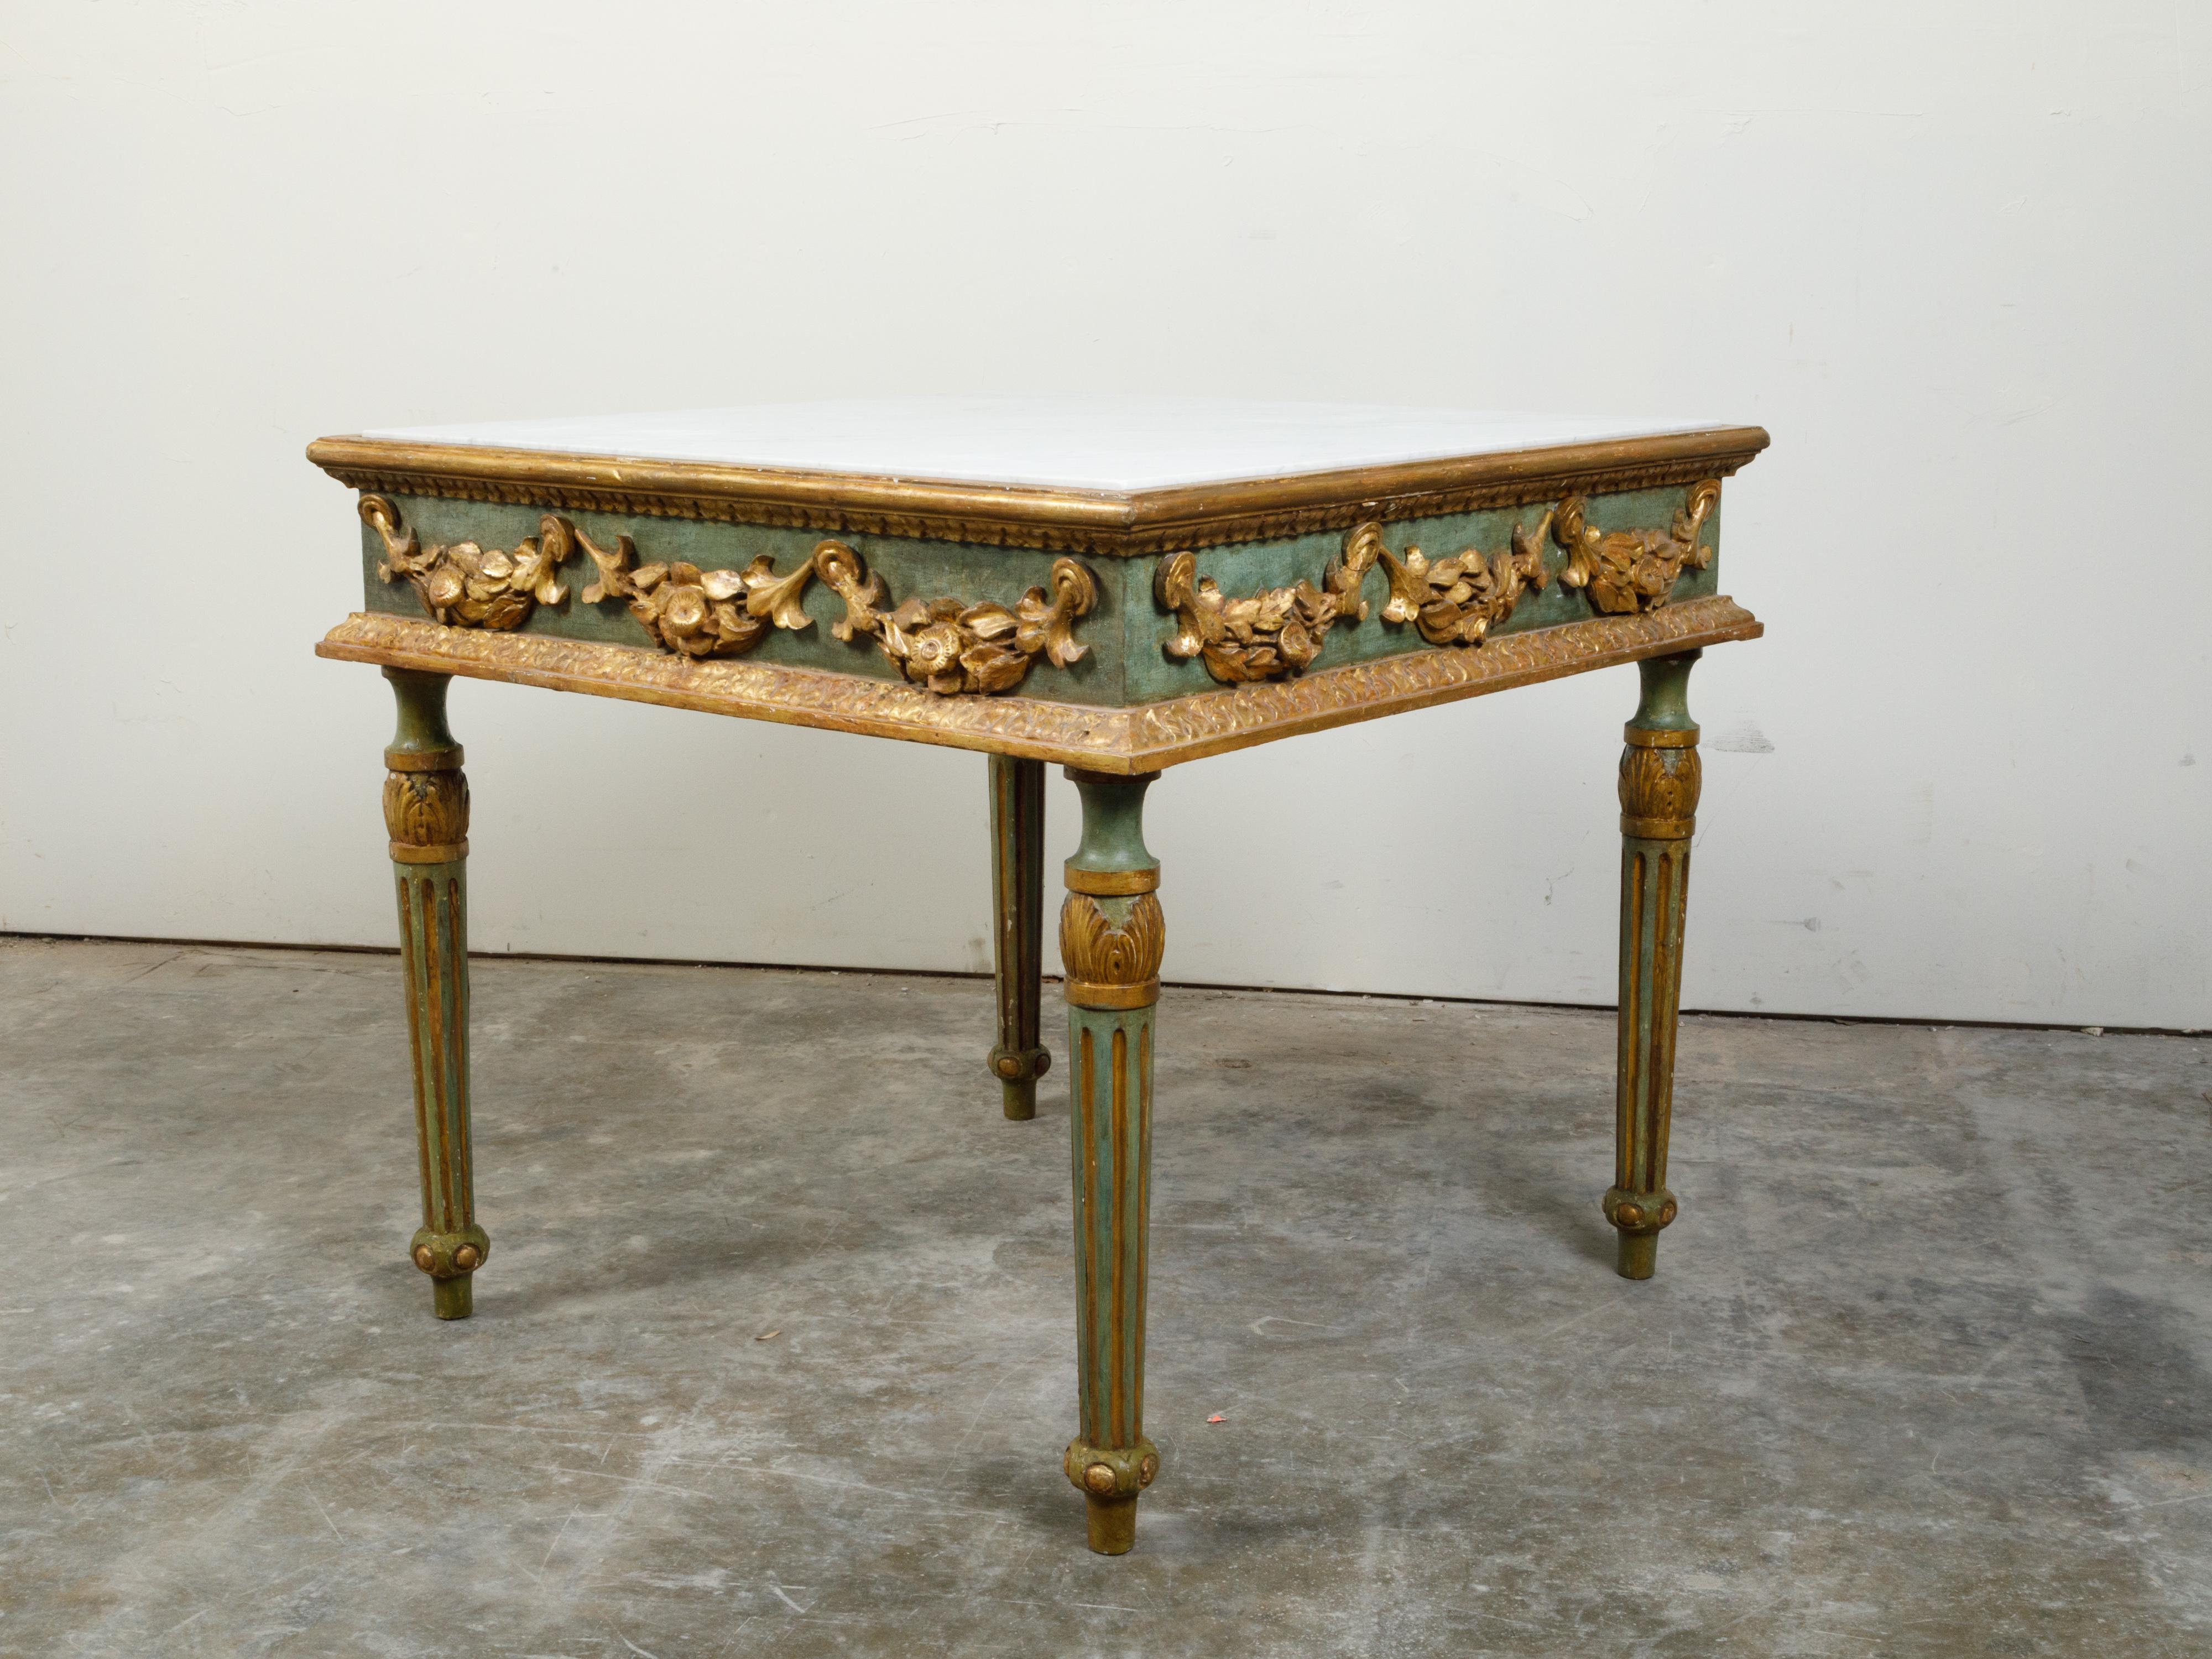 Italian Neoclassical Period 18th Century Center Table with Carved Gilt Garlands For Sale 3